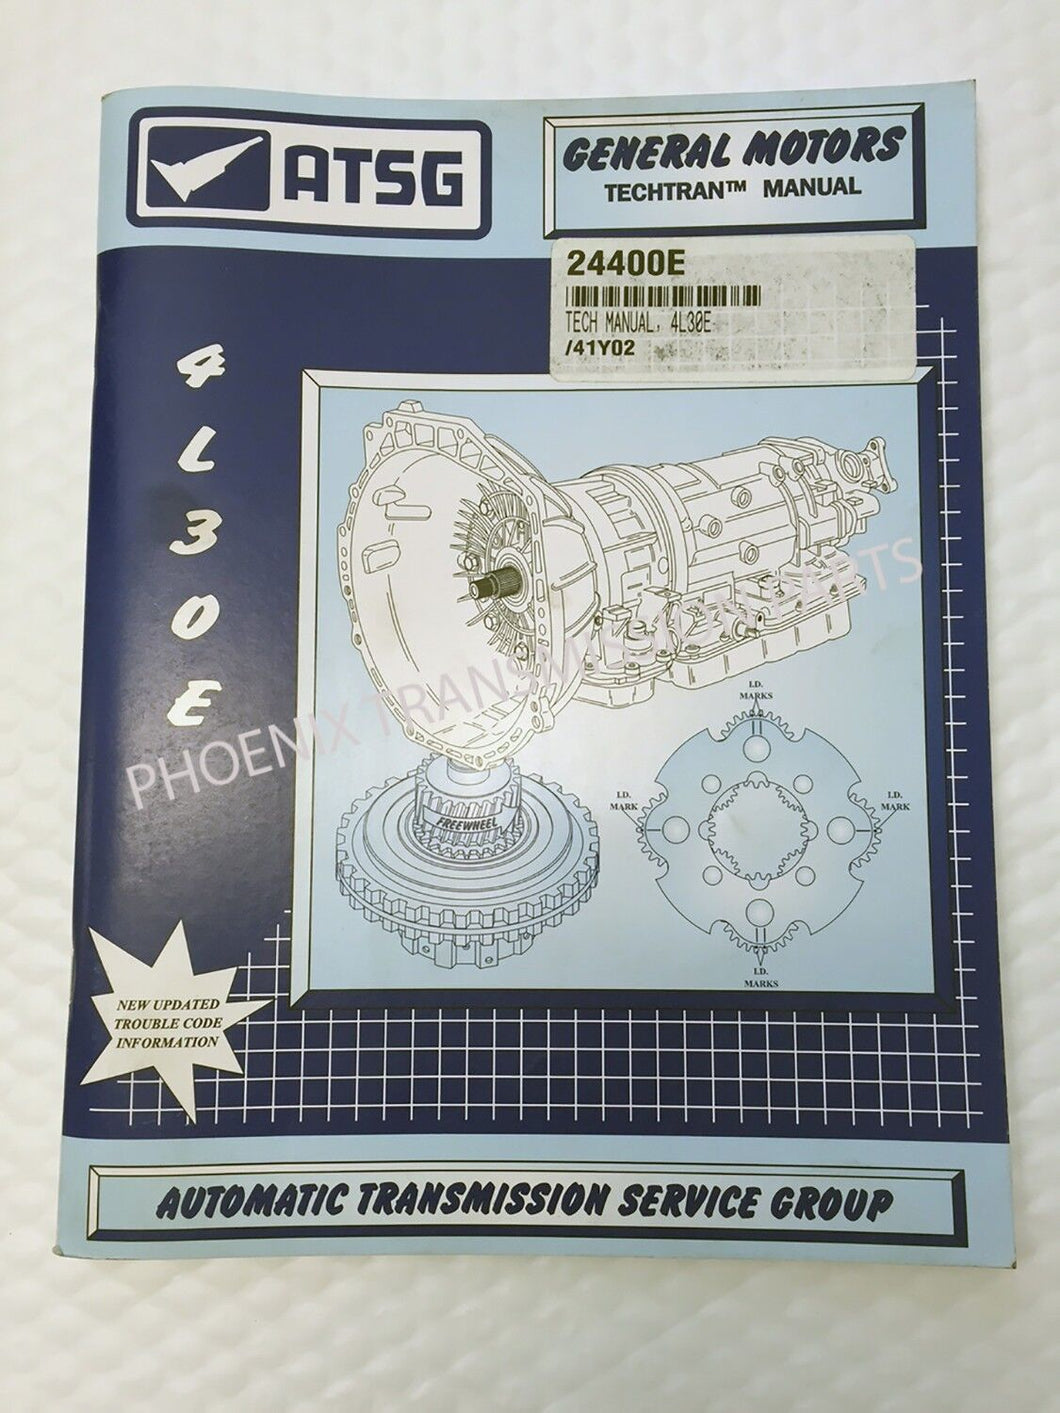 4L30E Transmission ATSG Technical Repair and Service Manual for GM BMW